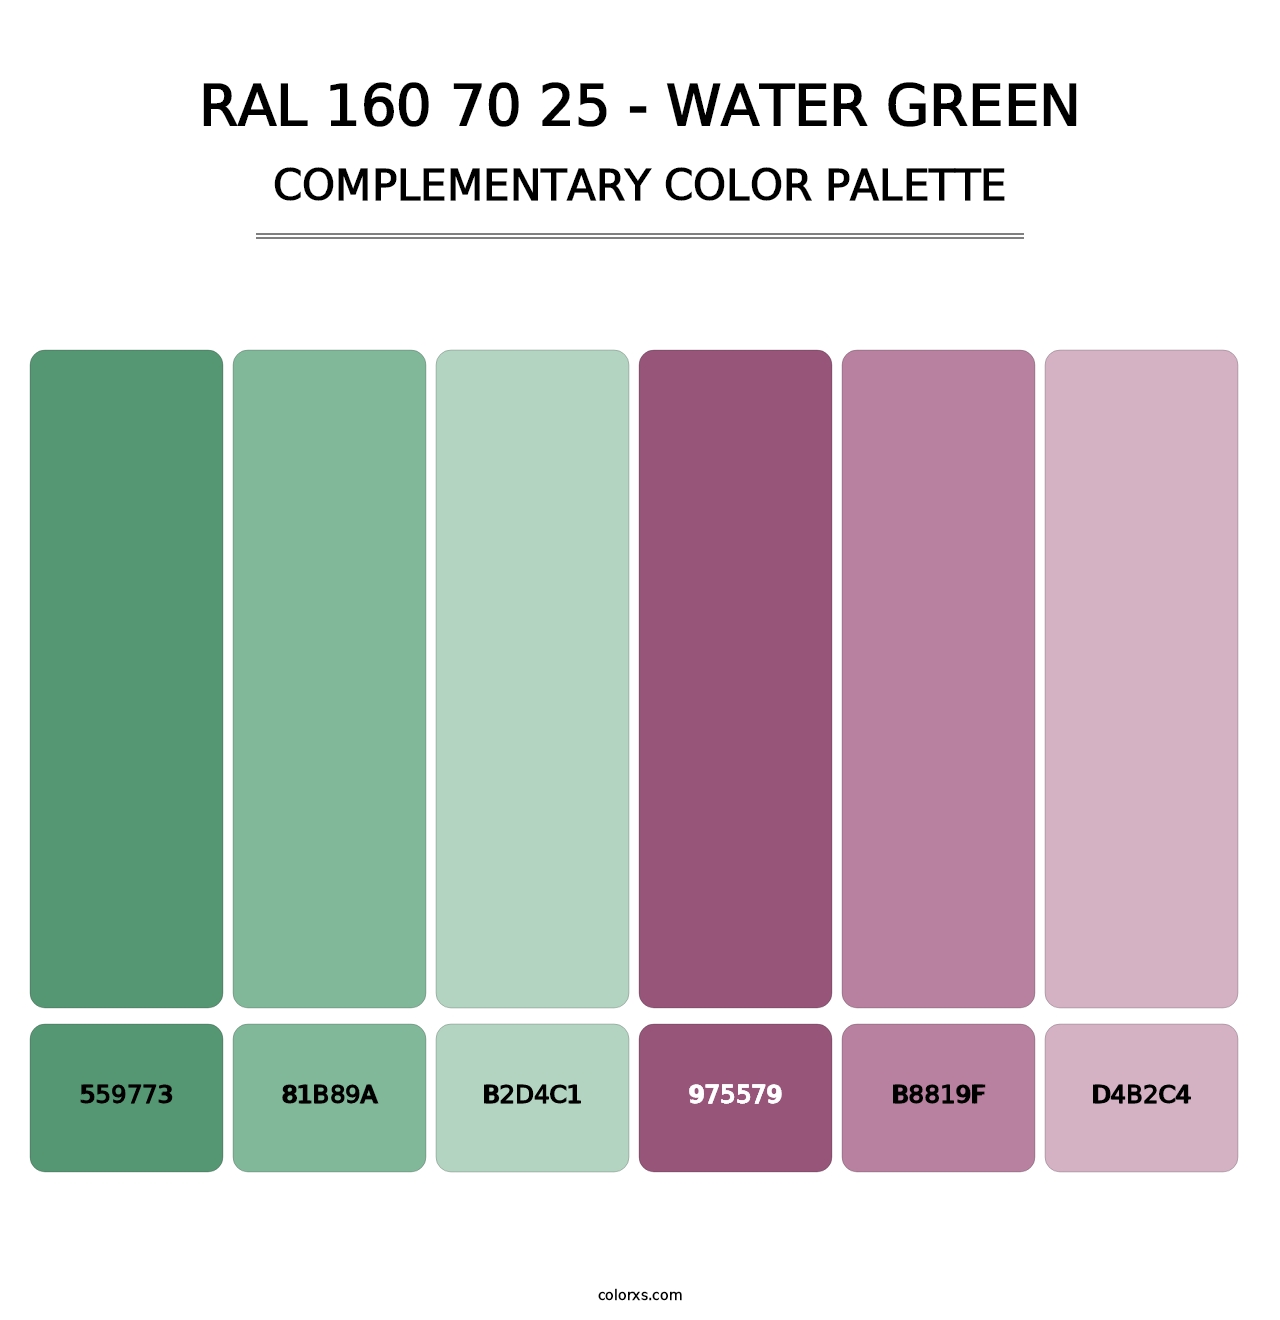 RAL 160 70 25 - Water Green - Complementary Color Palette